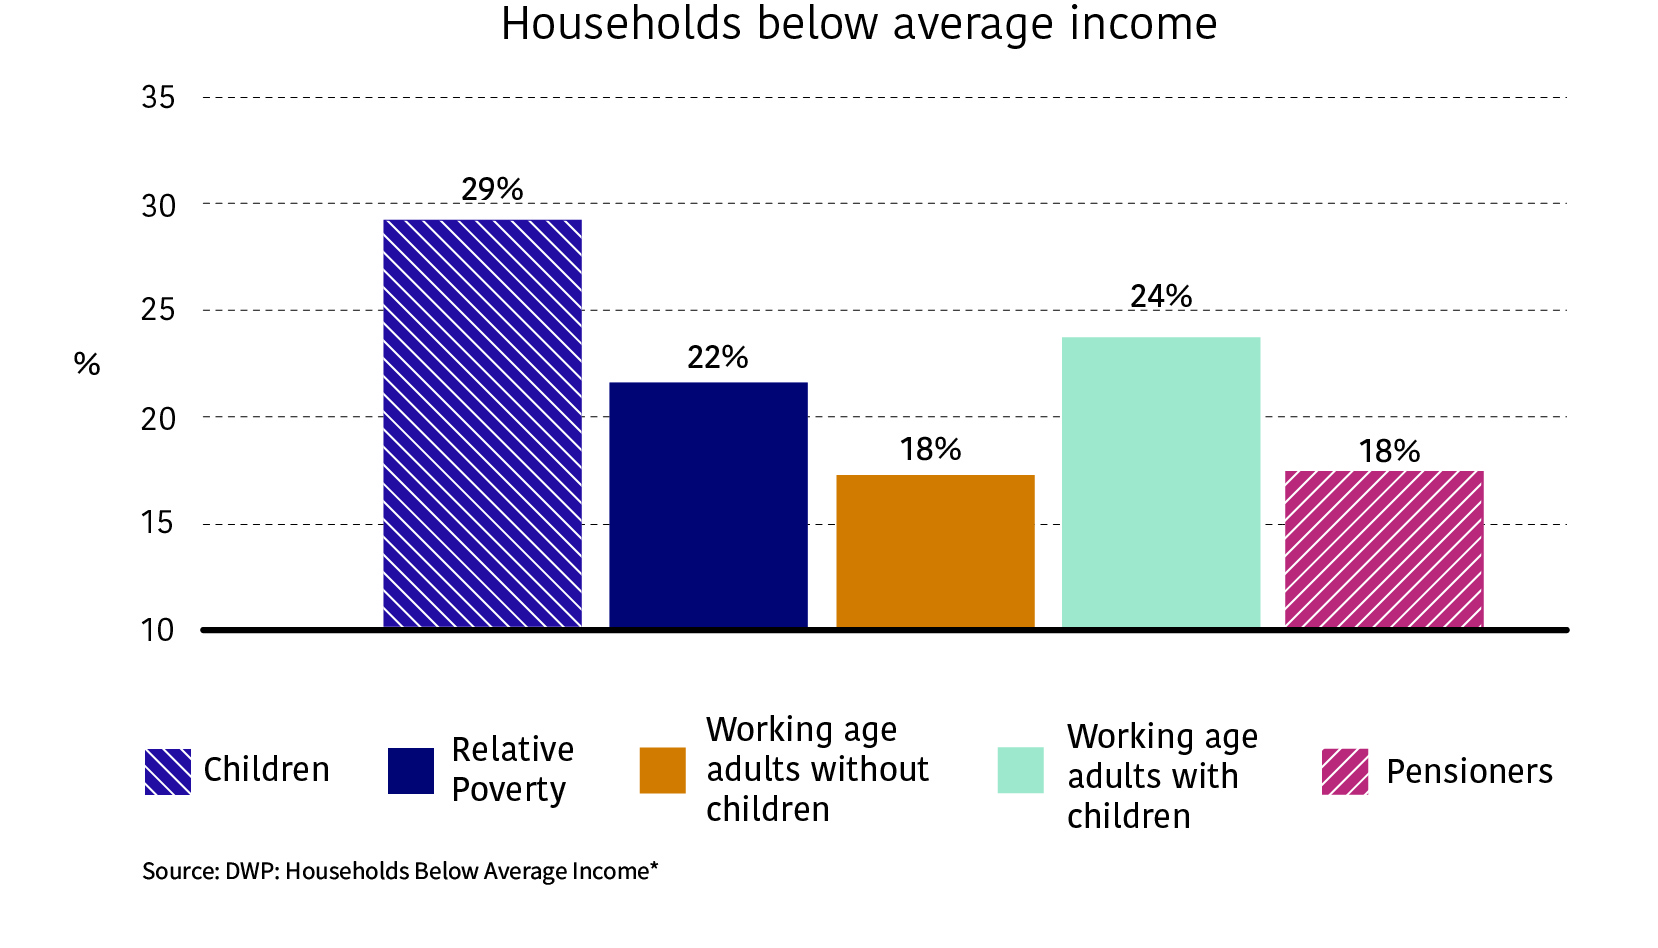 Bar chart to show percentage of different groups with household below average income (29% of children, 22% of people in relative poverty, 18% of working age adults without children, 24% of working age adults with children, 18% of pensioners).